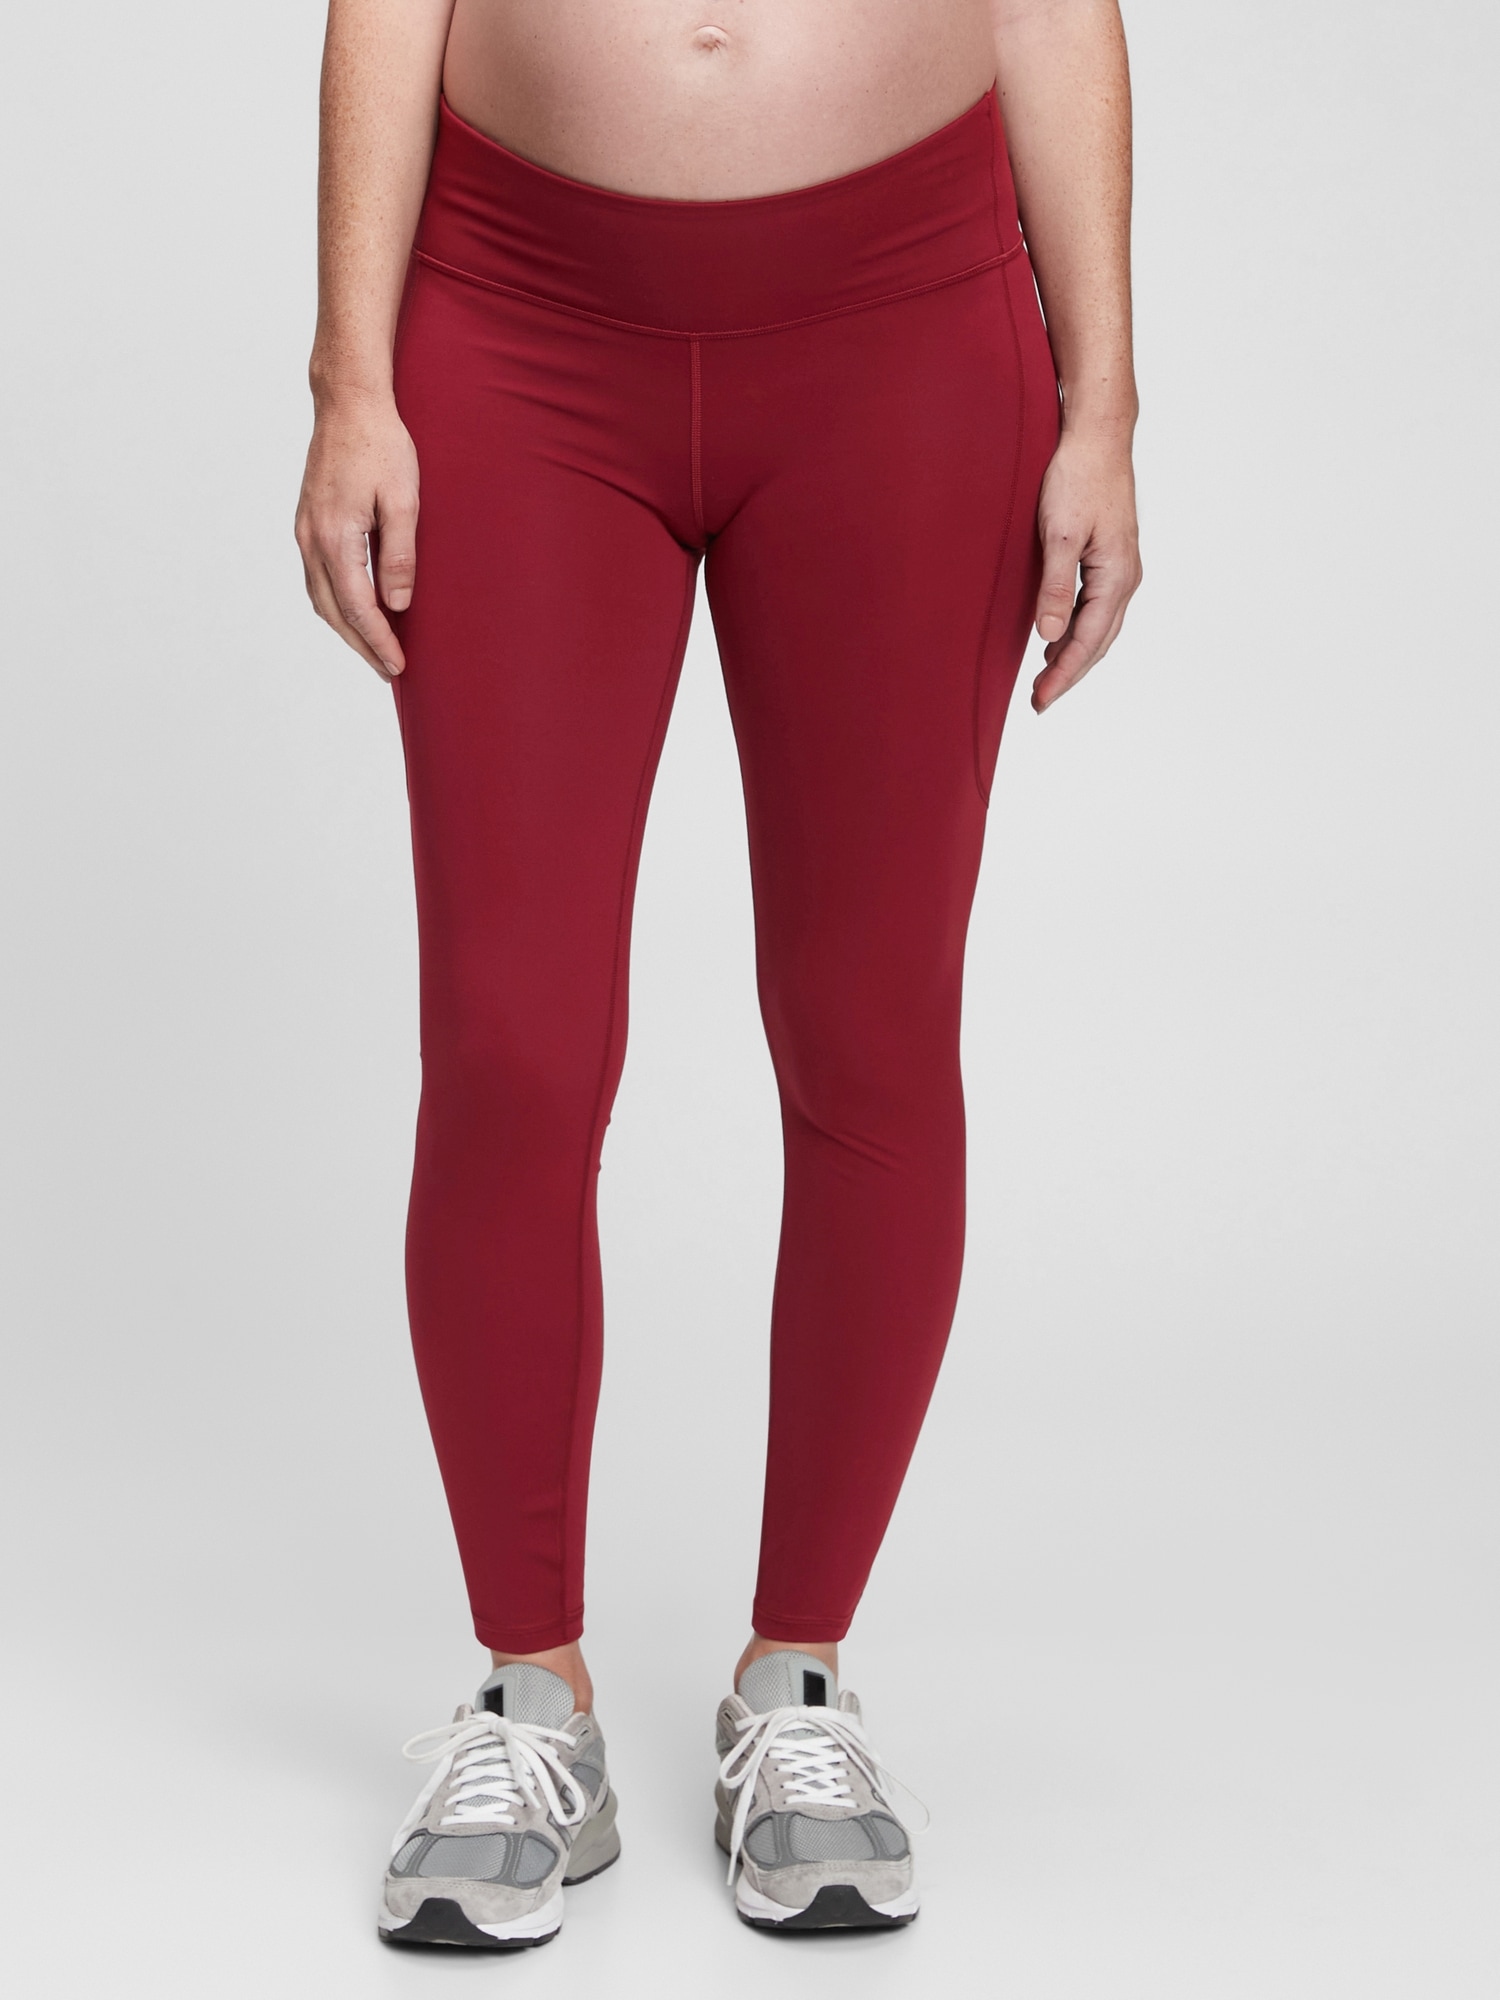 Lululemon Align Sale: Up To 50% Off Align Leggings, Tops And More